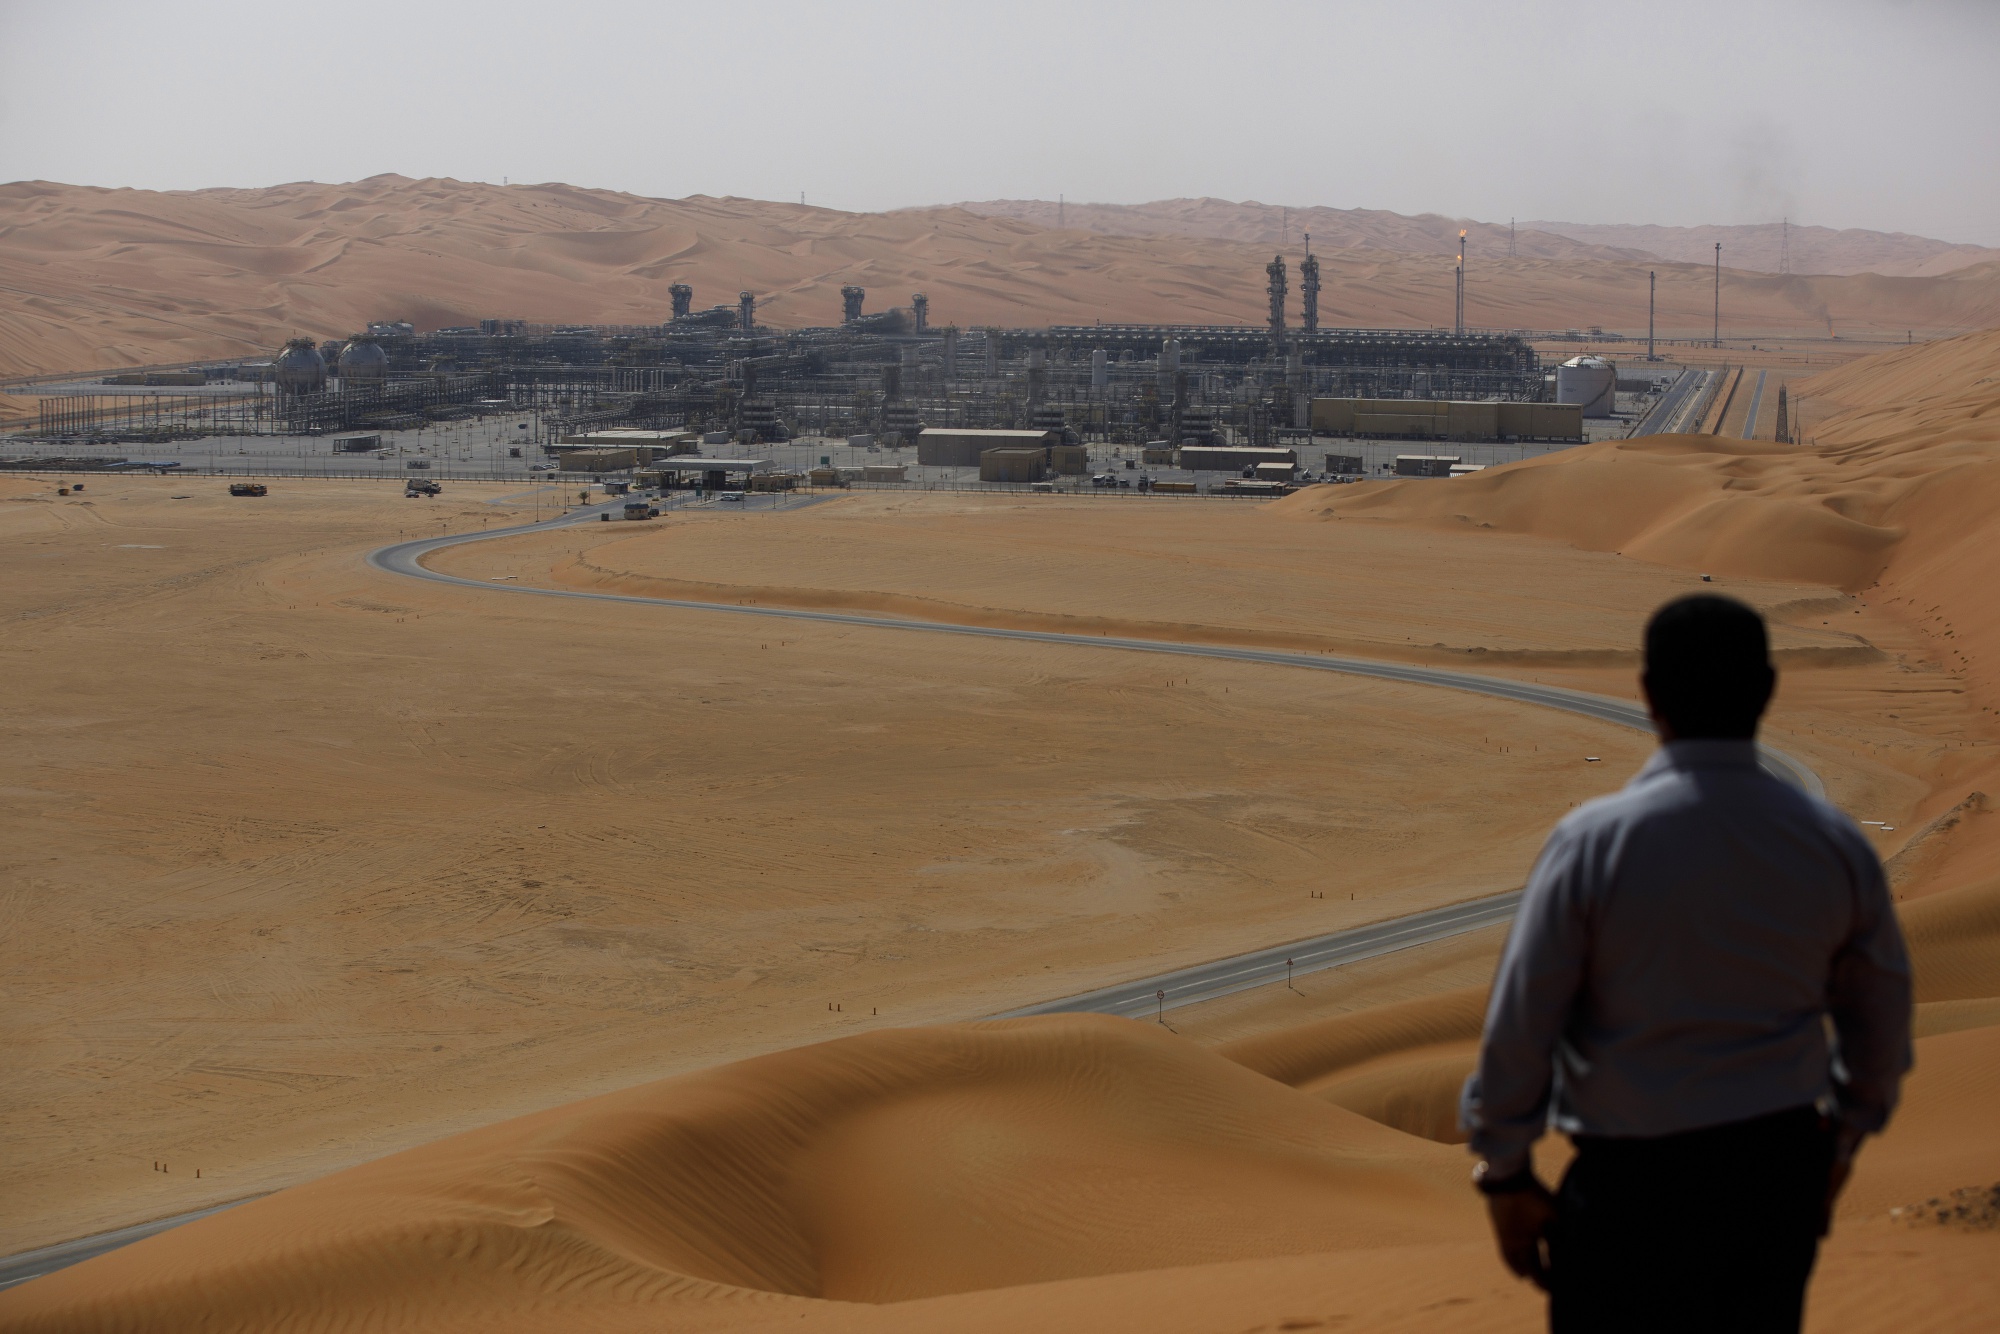 An employee looks out over the Natural Gas Liquids facility in Saudi Aramco's Shaybah oilfield.